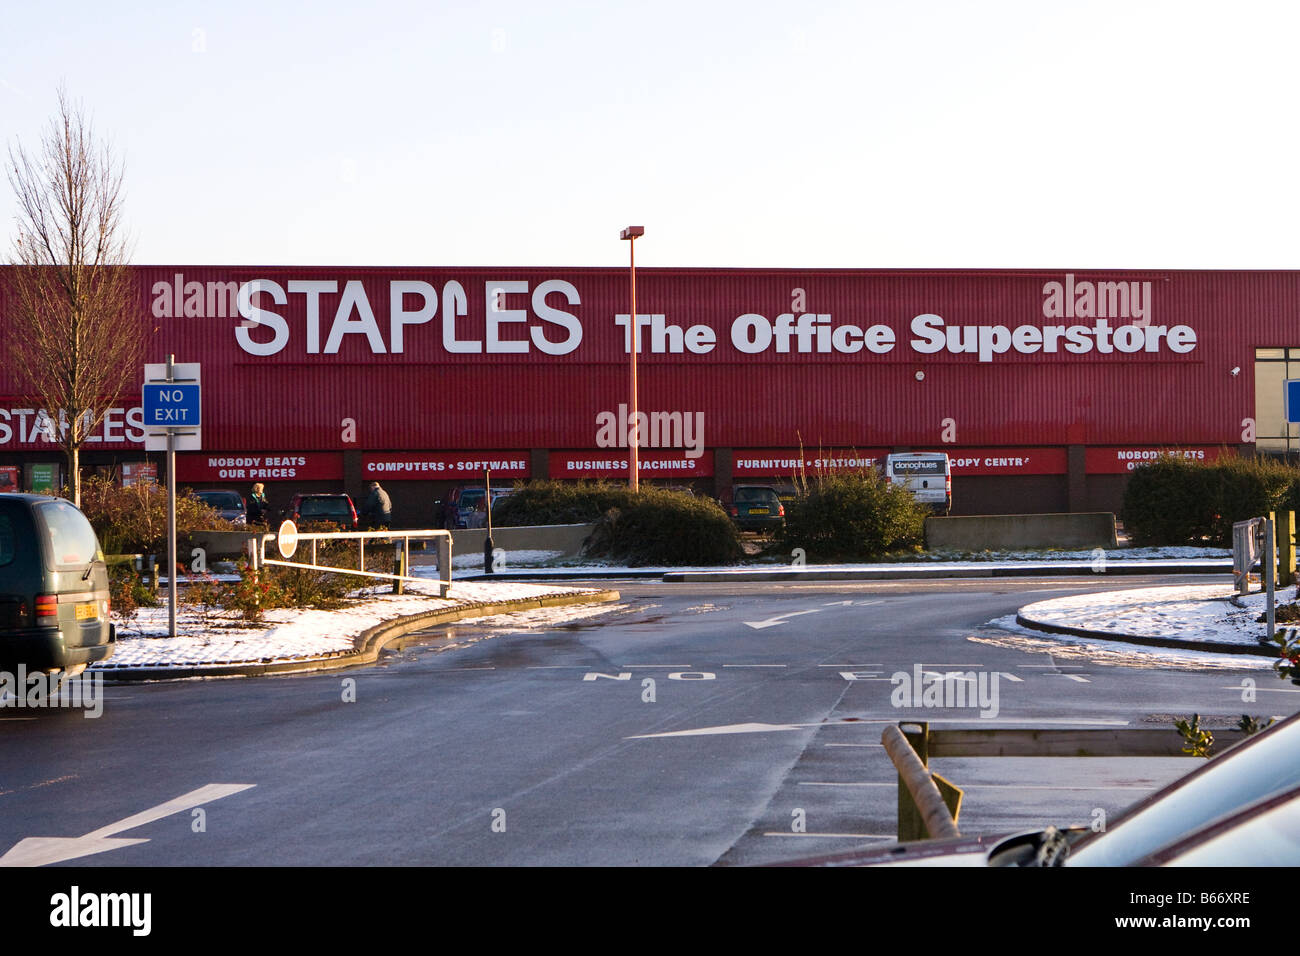 Staples Office superstore retail park Stock Photo